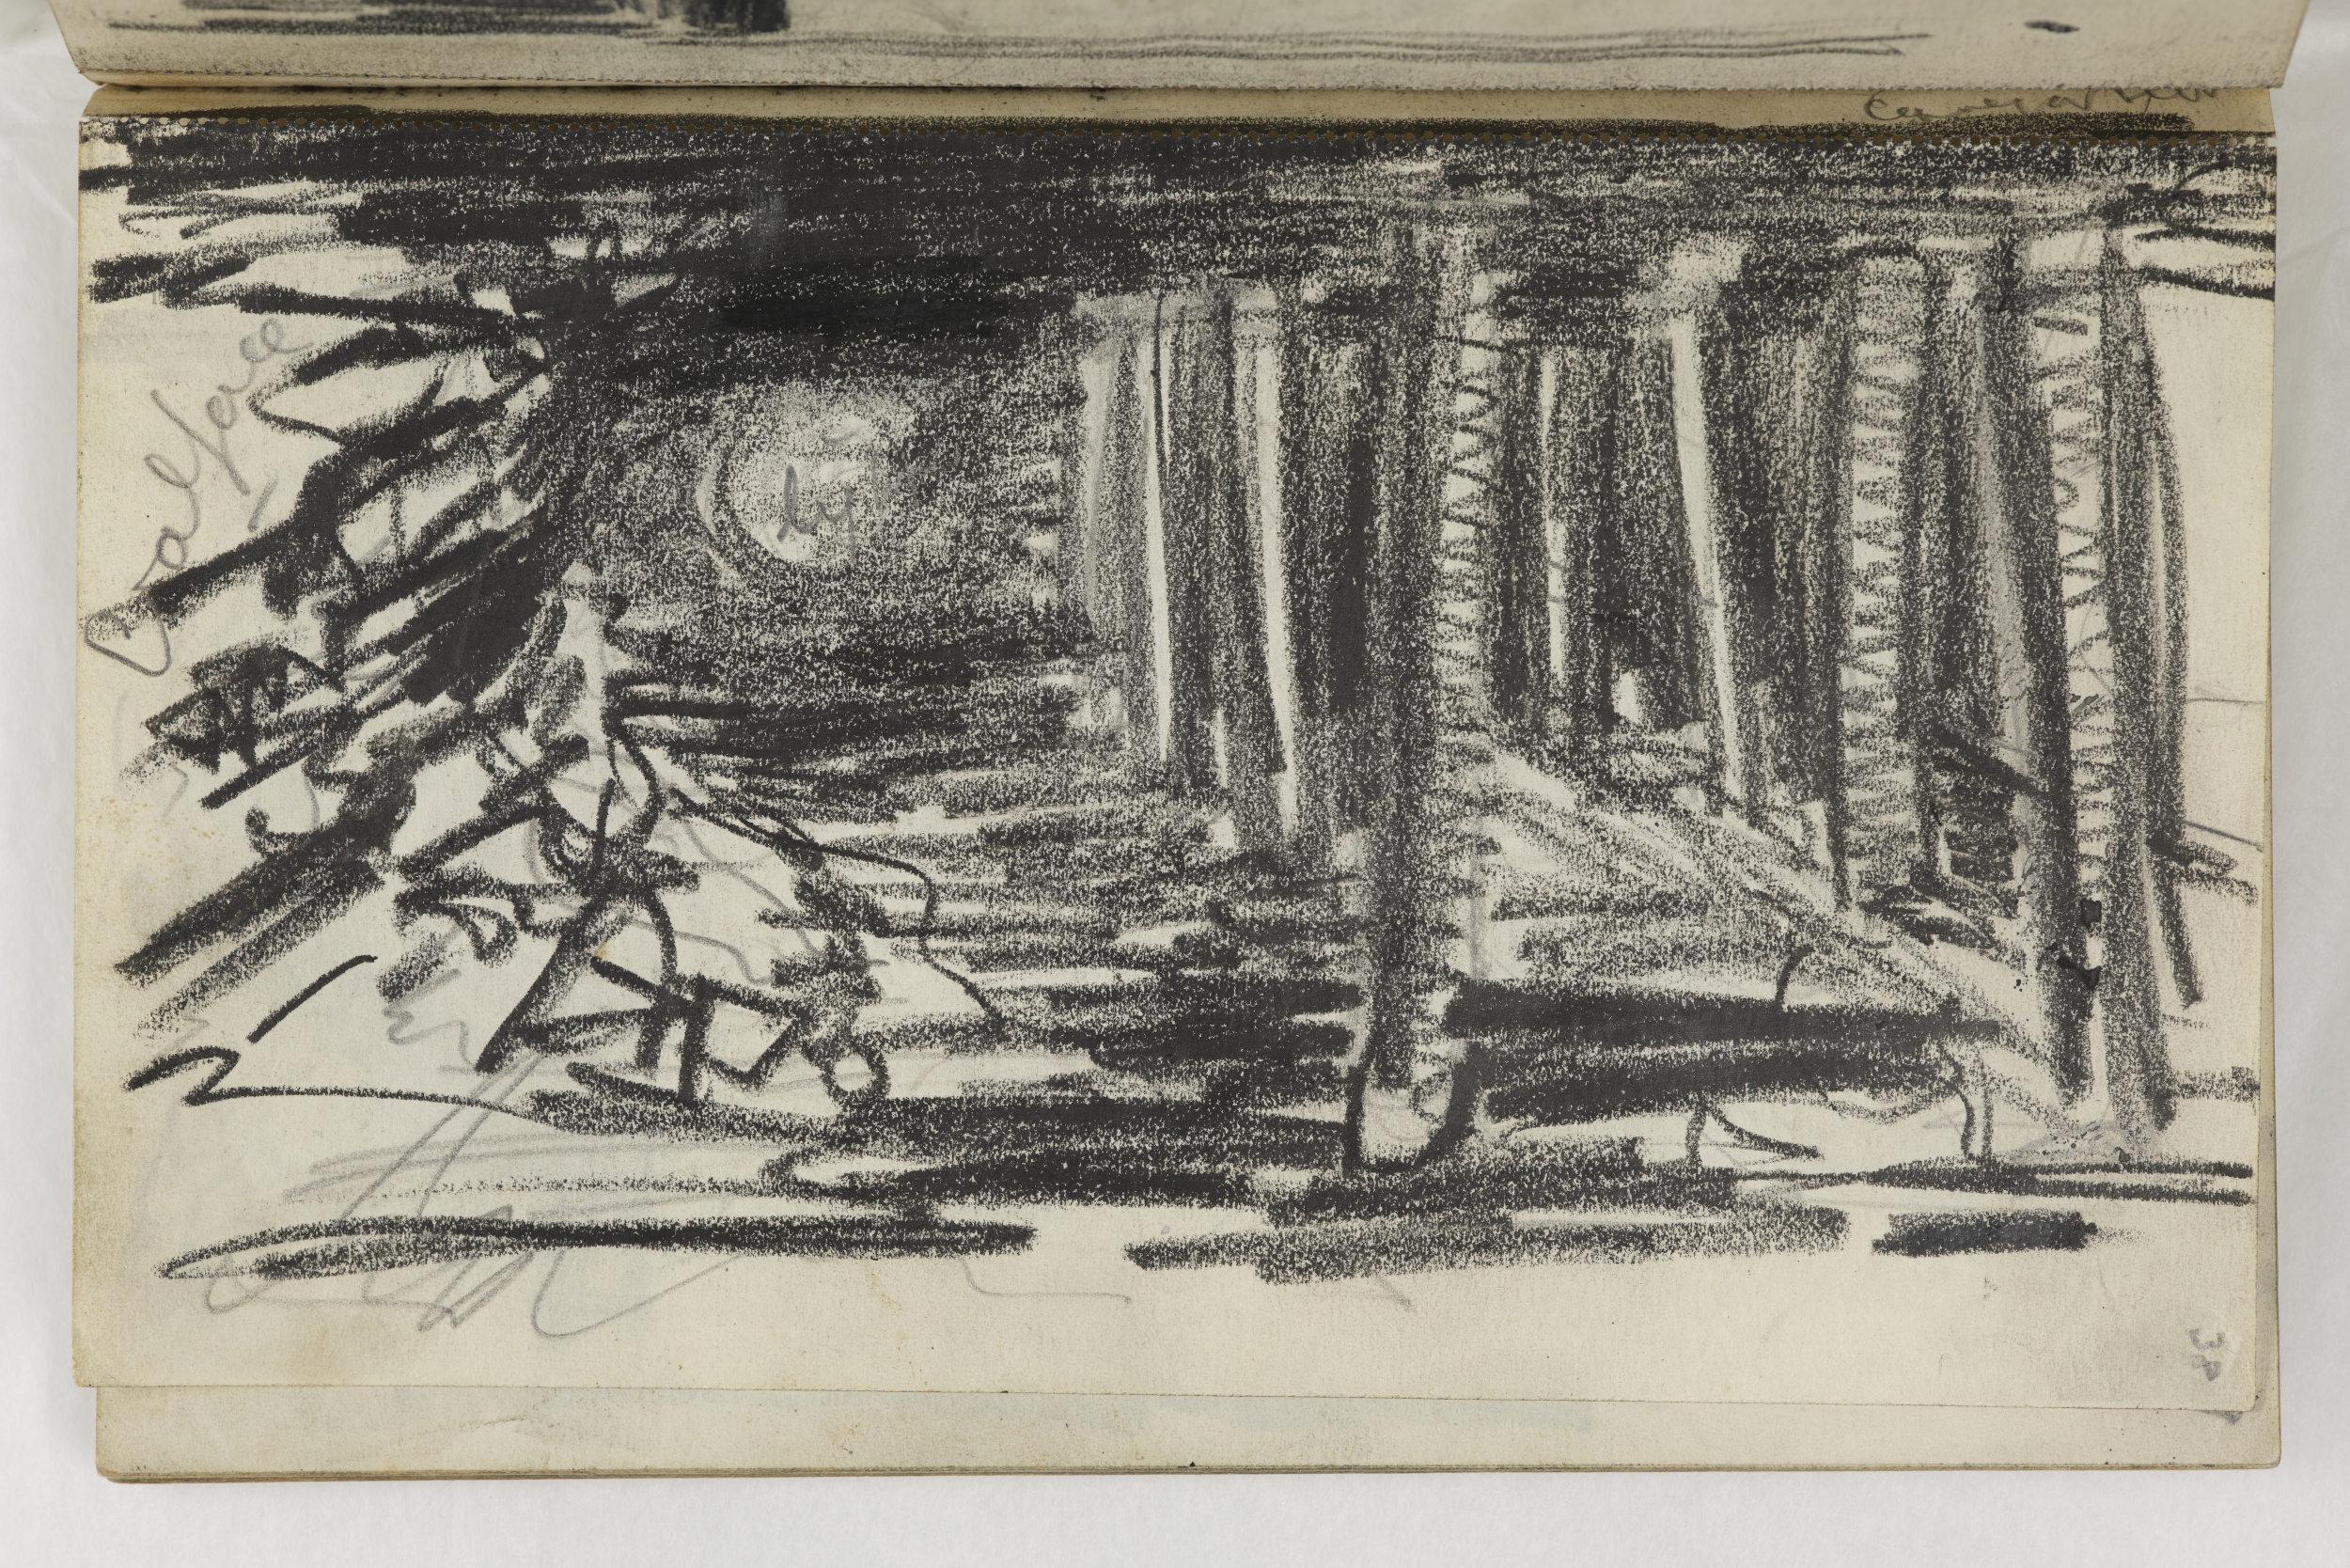 View Down Tunnel, 1941 Page 38 from Coalmining Notebook A HMF 1895 pencil, crayon 127 x 200 mm The Henry Moore Foundation: gift of the artist 1977 Photo: Nigel Moore. Reproduced by permission of The Henry Moore Foundation